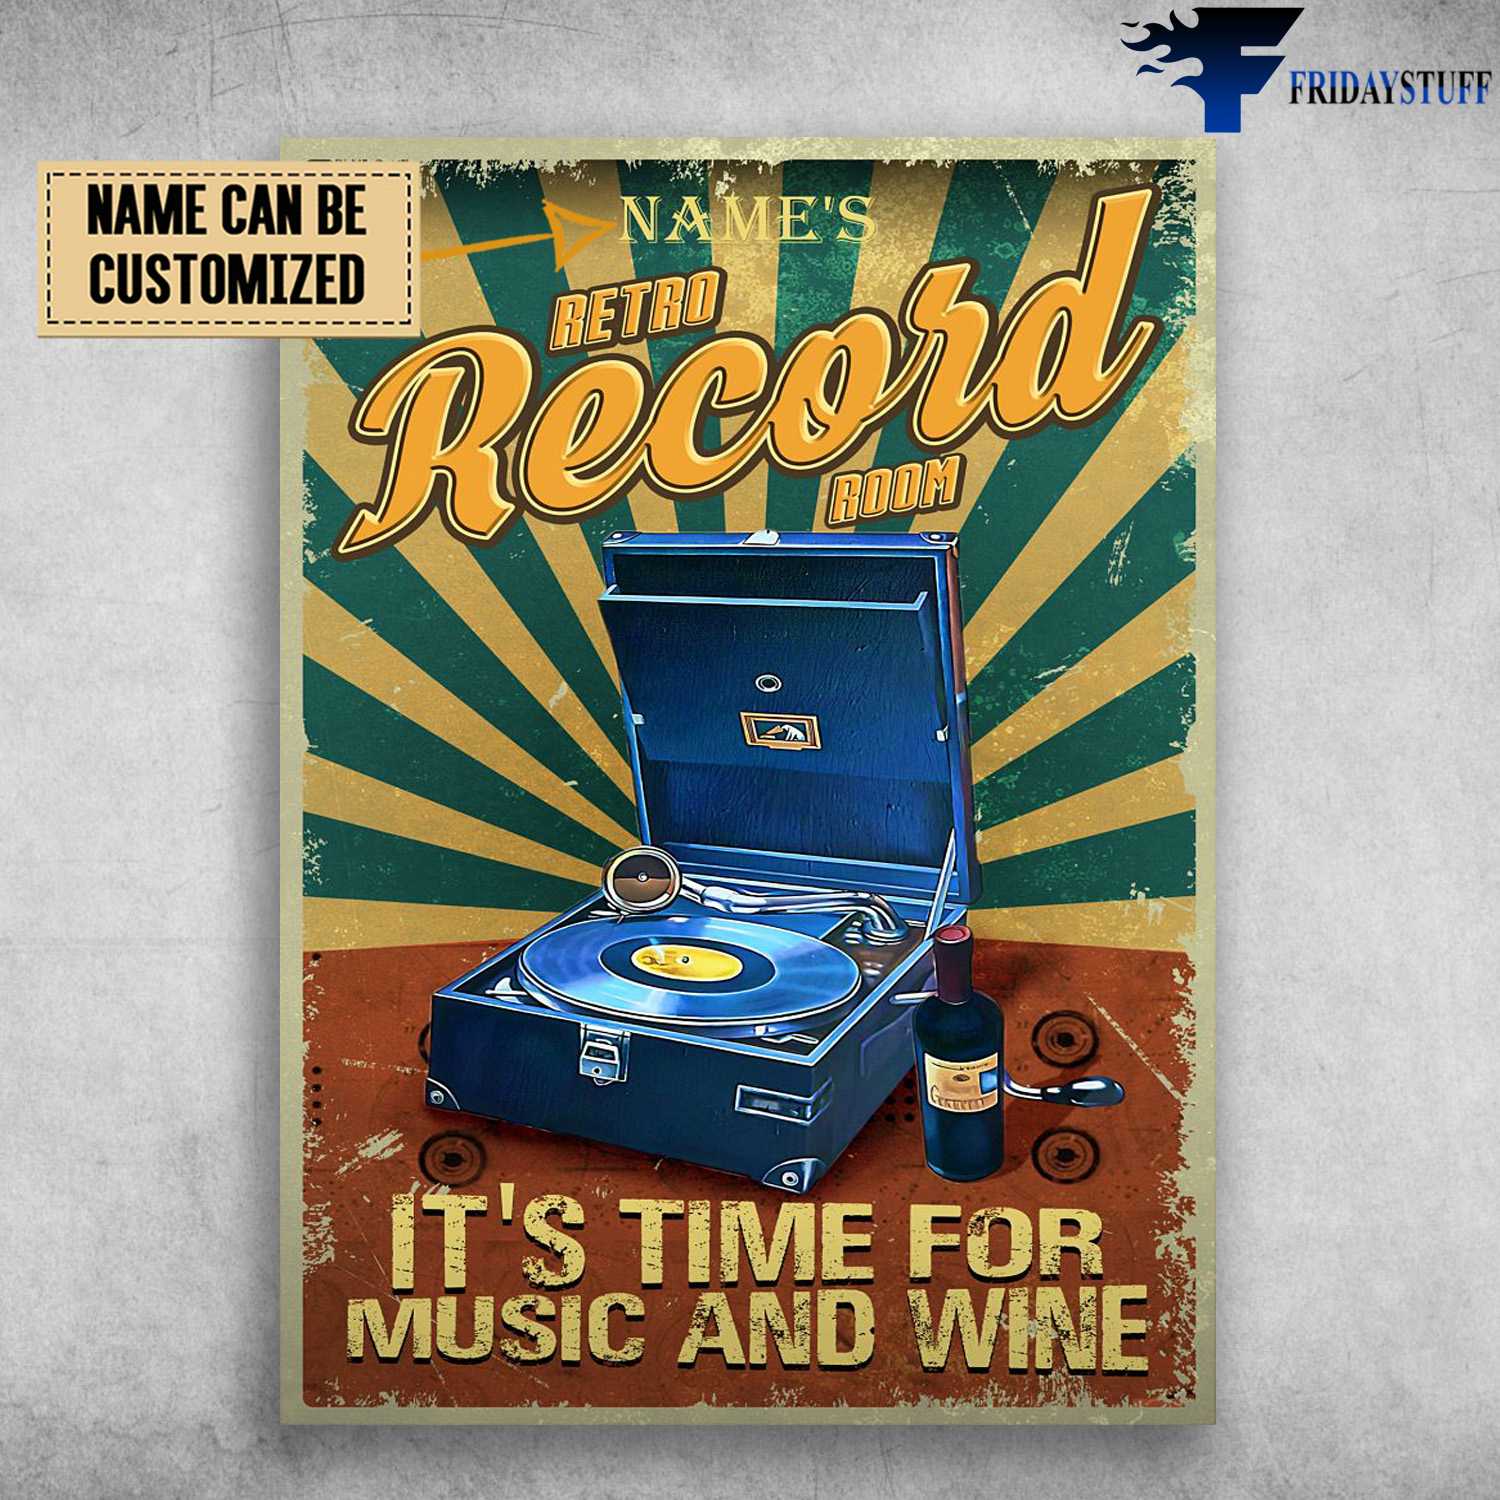 Retro Record Room, Vinyl Record, It's Time For Music And Wine